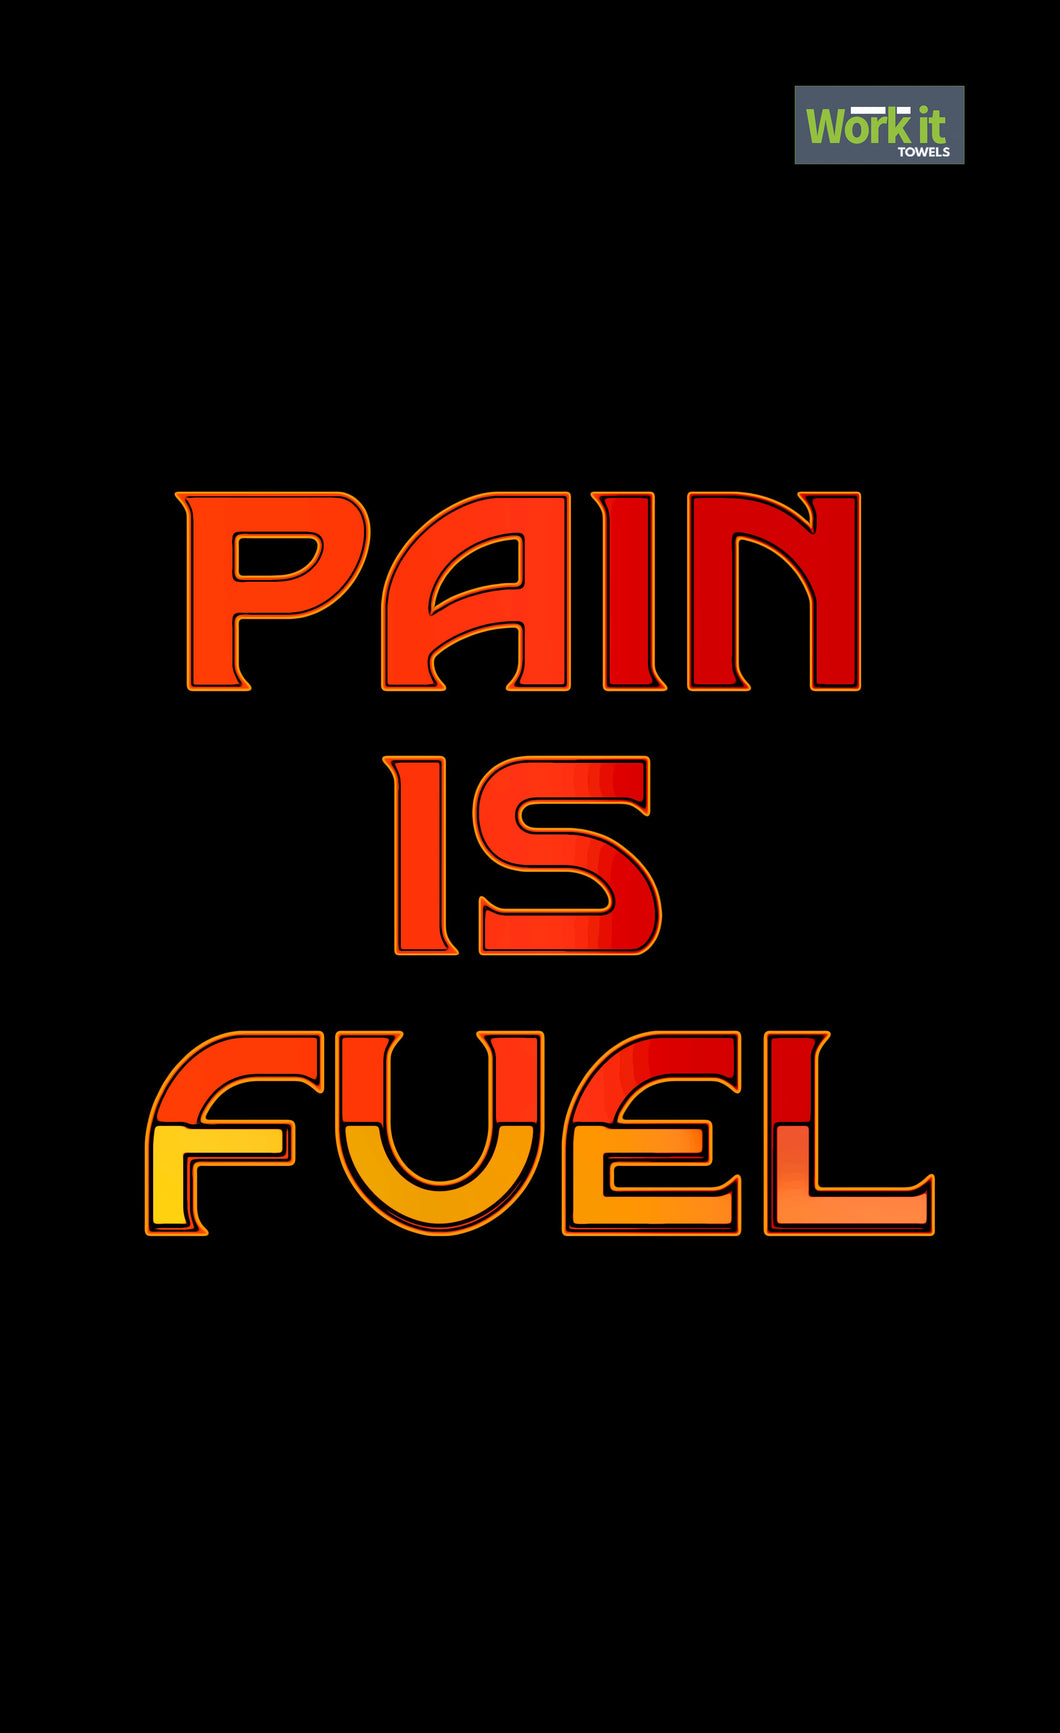 Pain is Fuel - work it towels